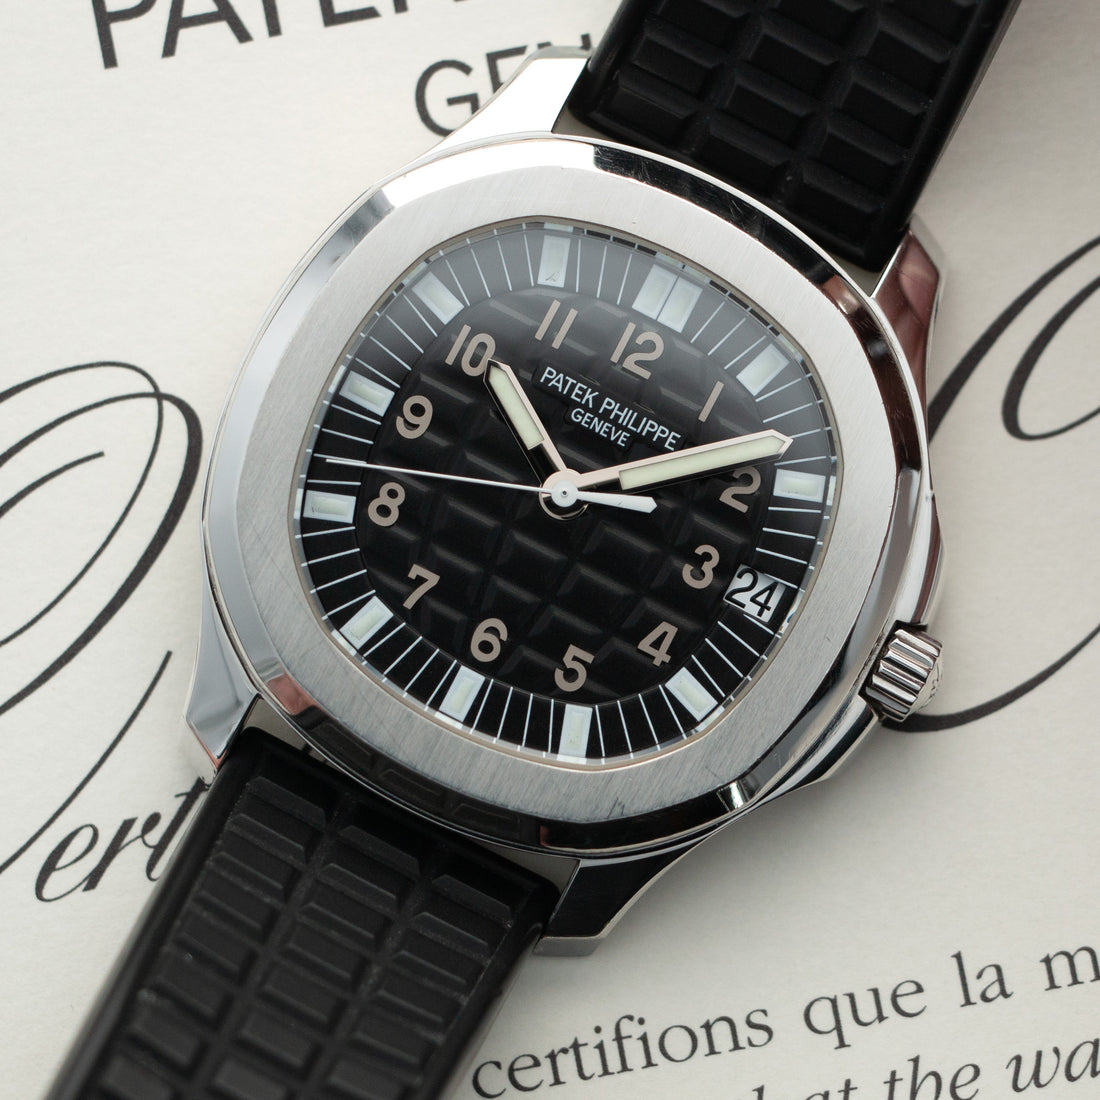 Patek Philippe Aquanaut Watch Ref. 5065 with Original Box and Papers